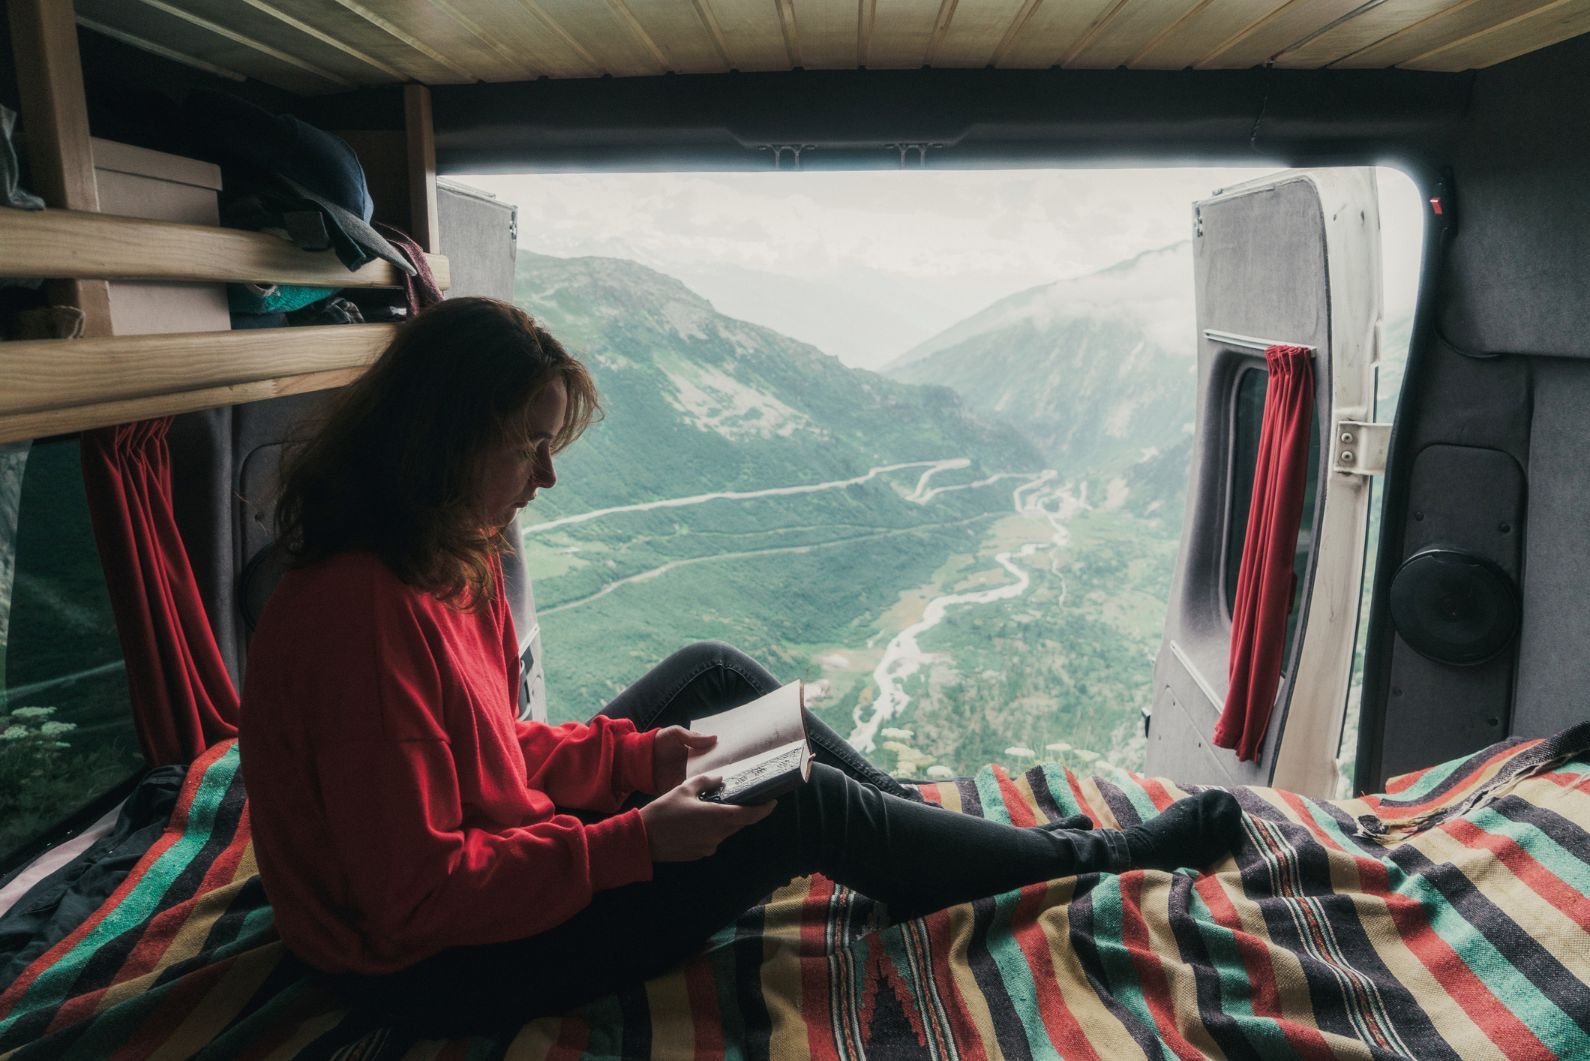 13 of the Best Travel Books to Read When You’re Stuck Inside